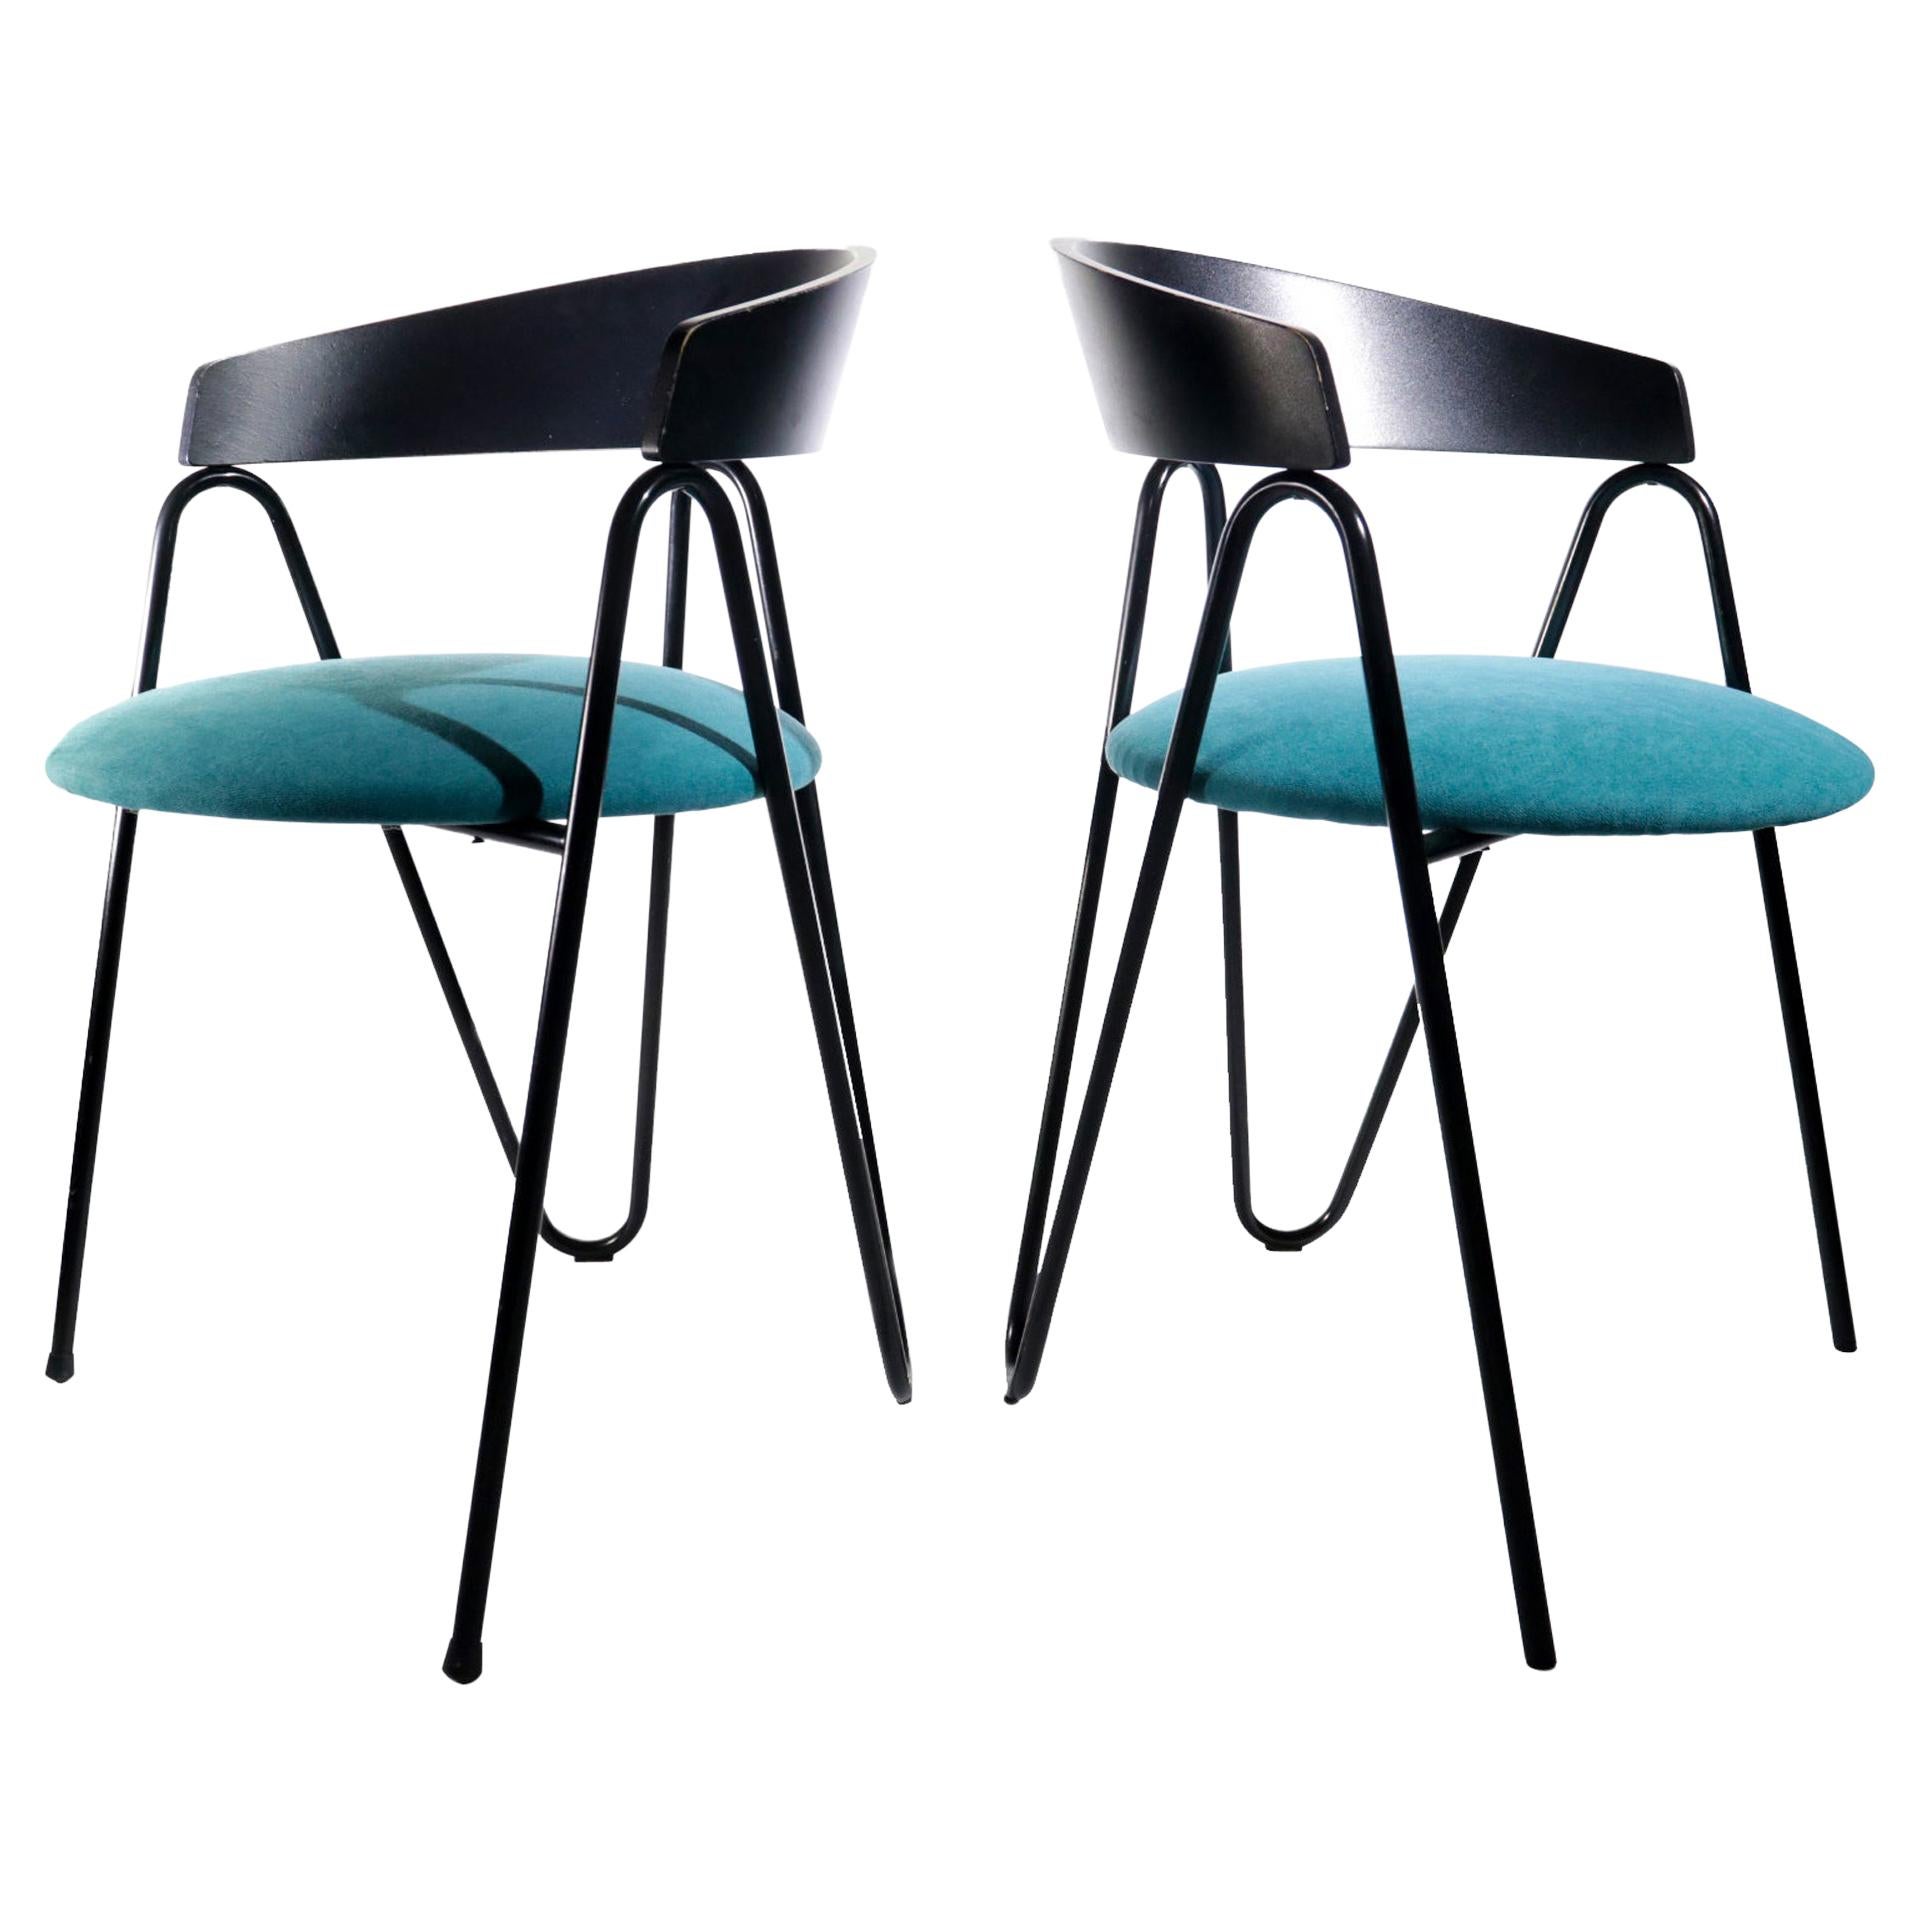 5 Postmodern Memphis Milano Style Chairs from the 1980s For Sale